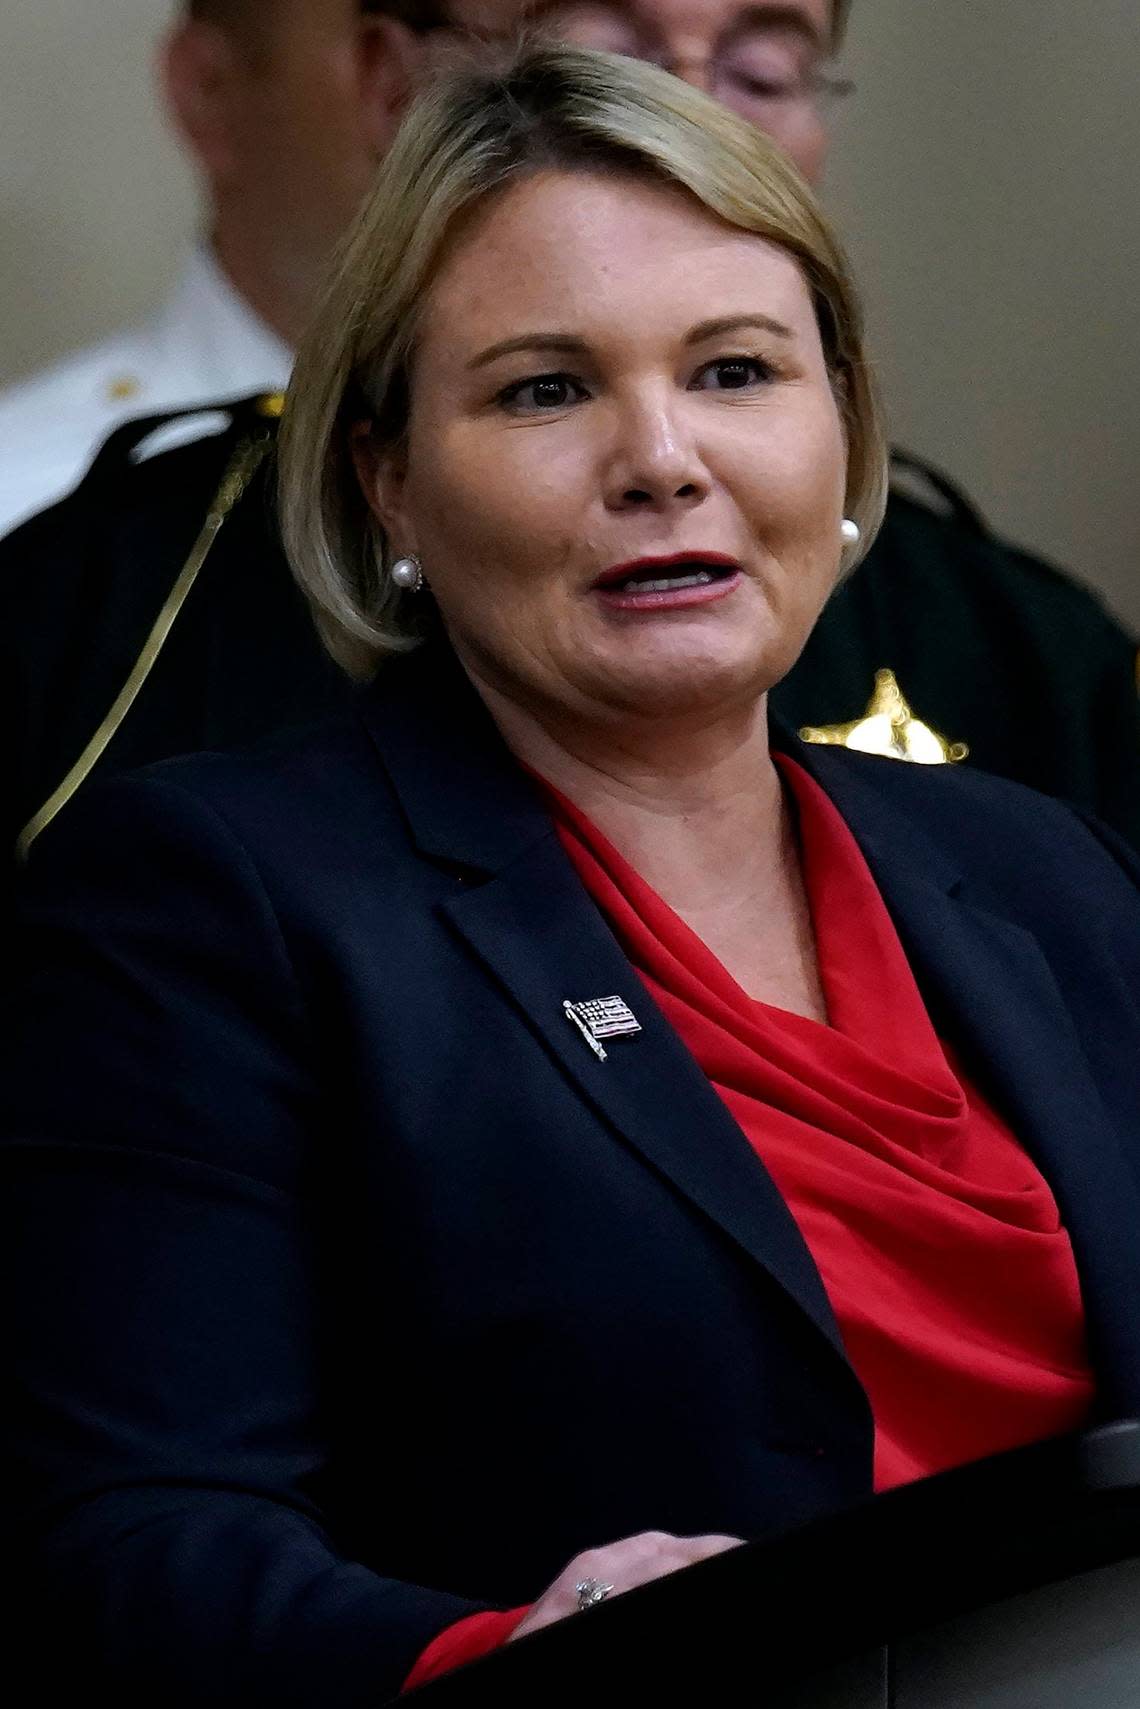 Judge Susan Lopez, acting state attorney for the 13th Judicial Circuit, speaks during a news conference with Florida Gov. Ron DeSantis Thursday, Aug. 4, 2022, in Tampa, Fla.